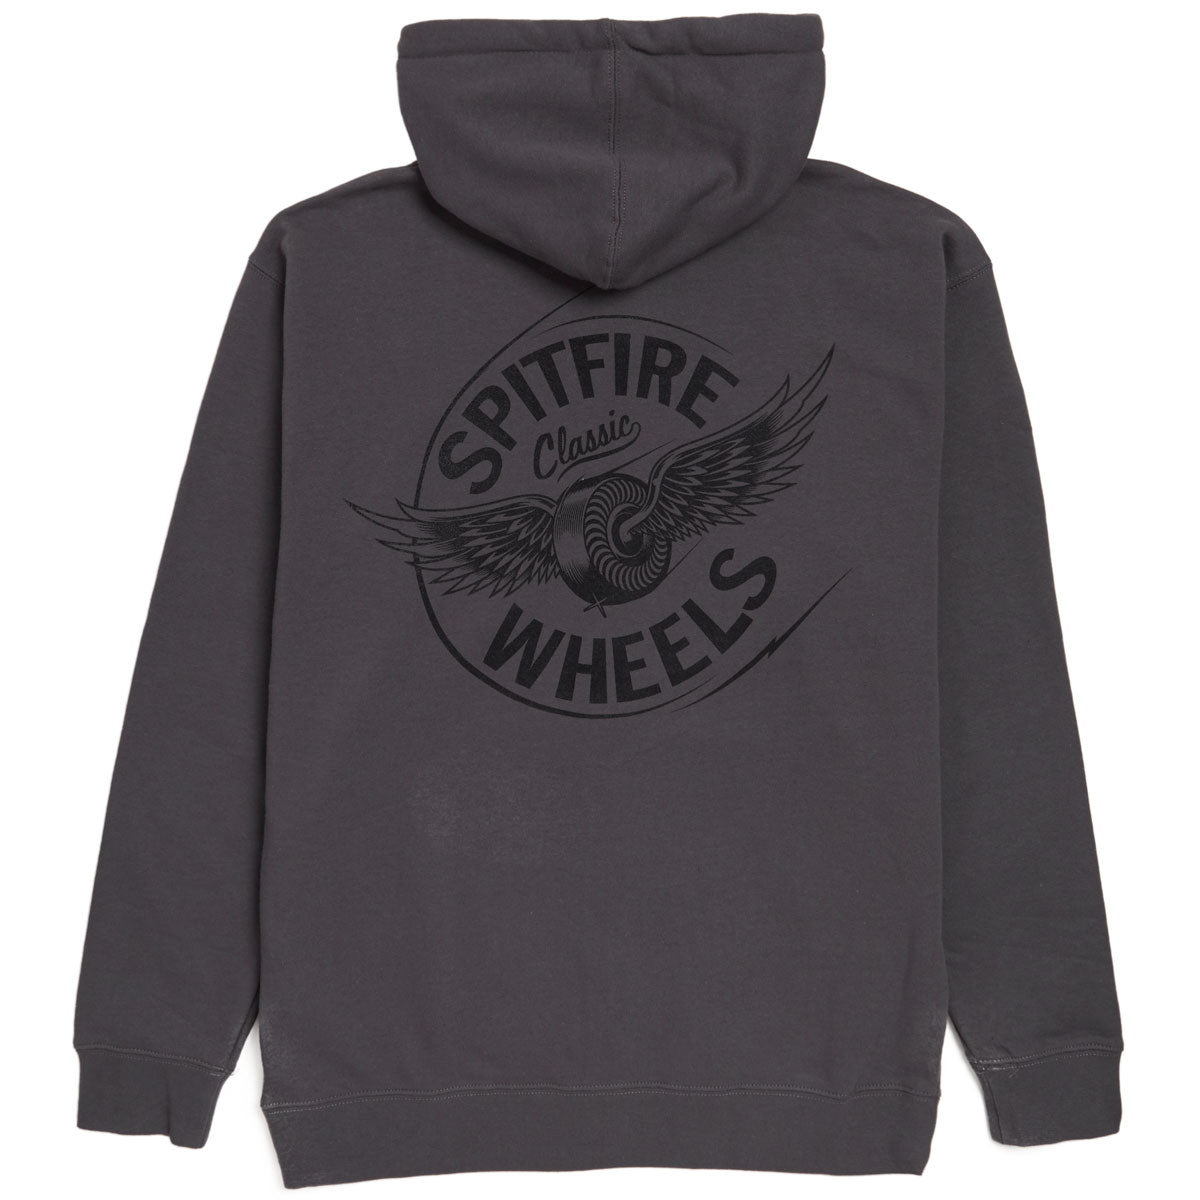 Spitfire Flying Classic Zip Up Hoodie - Charcoal image 2